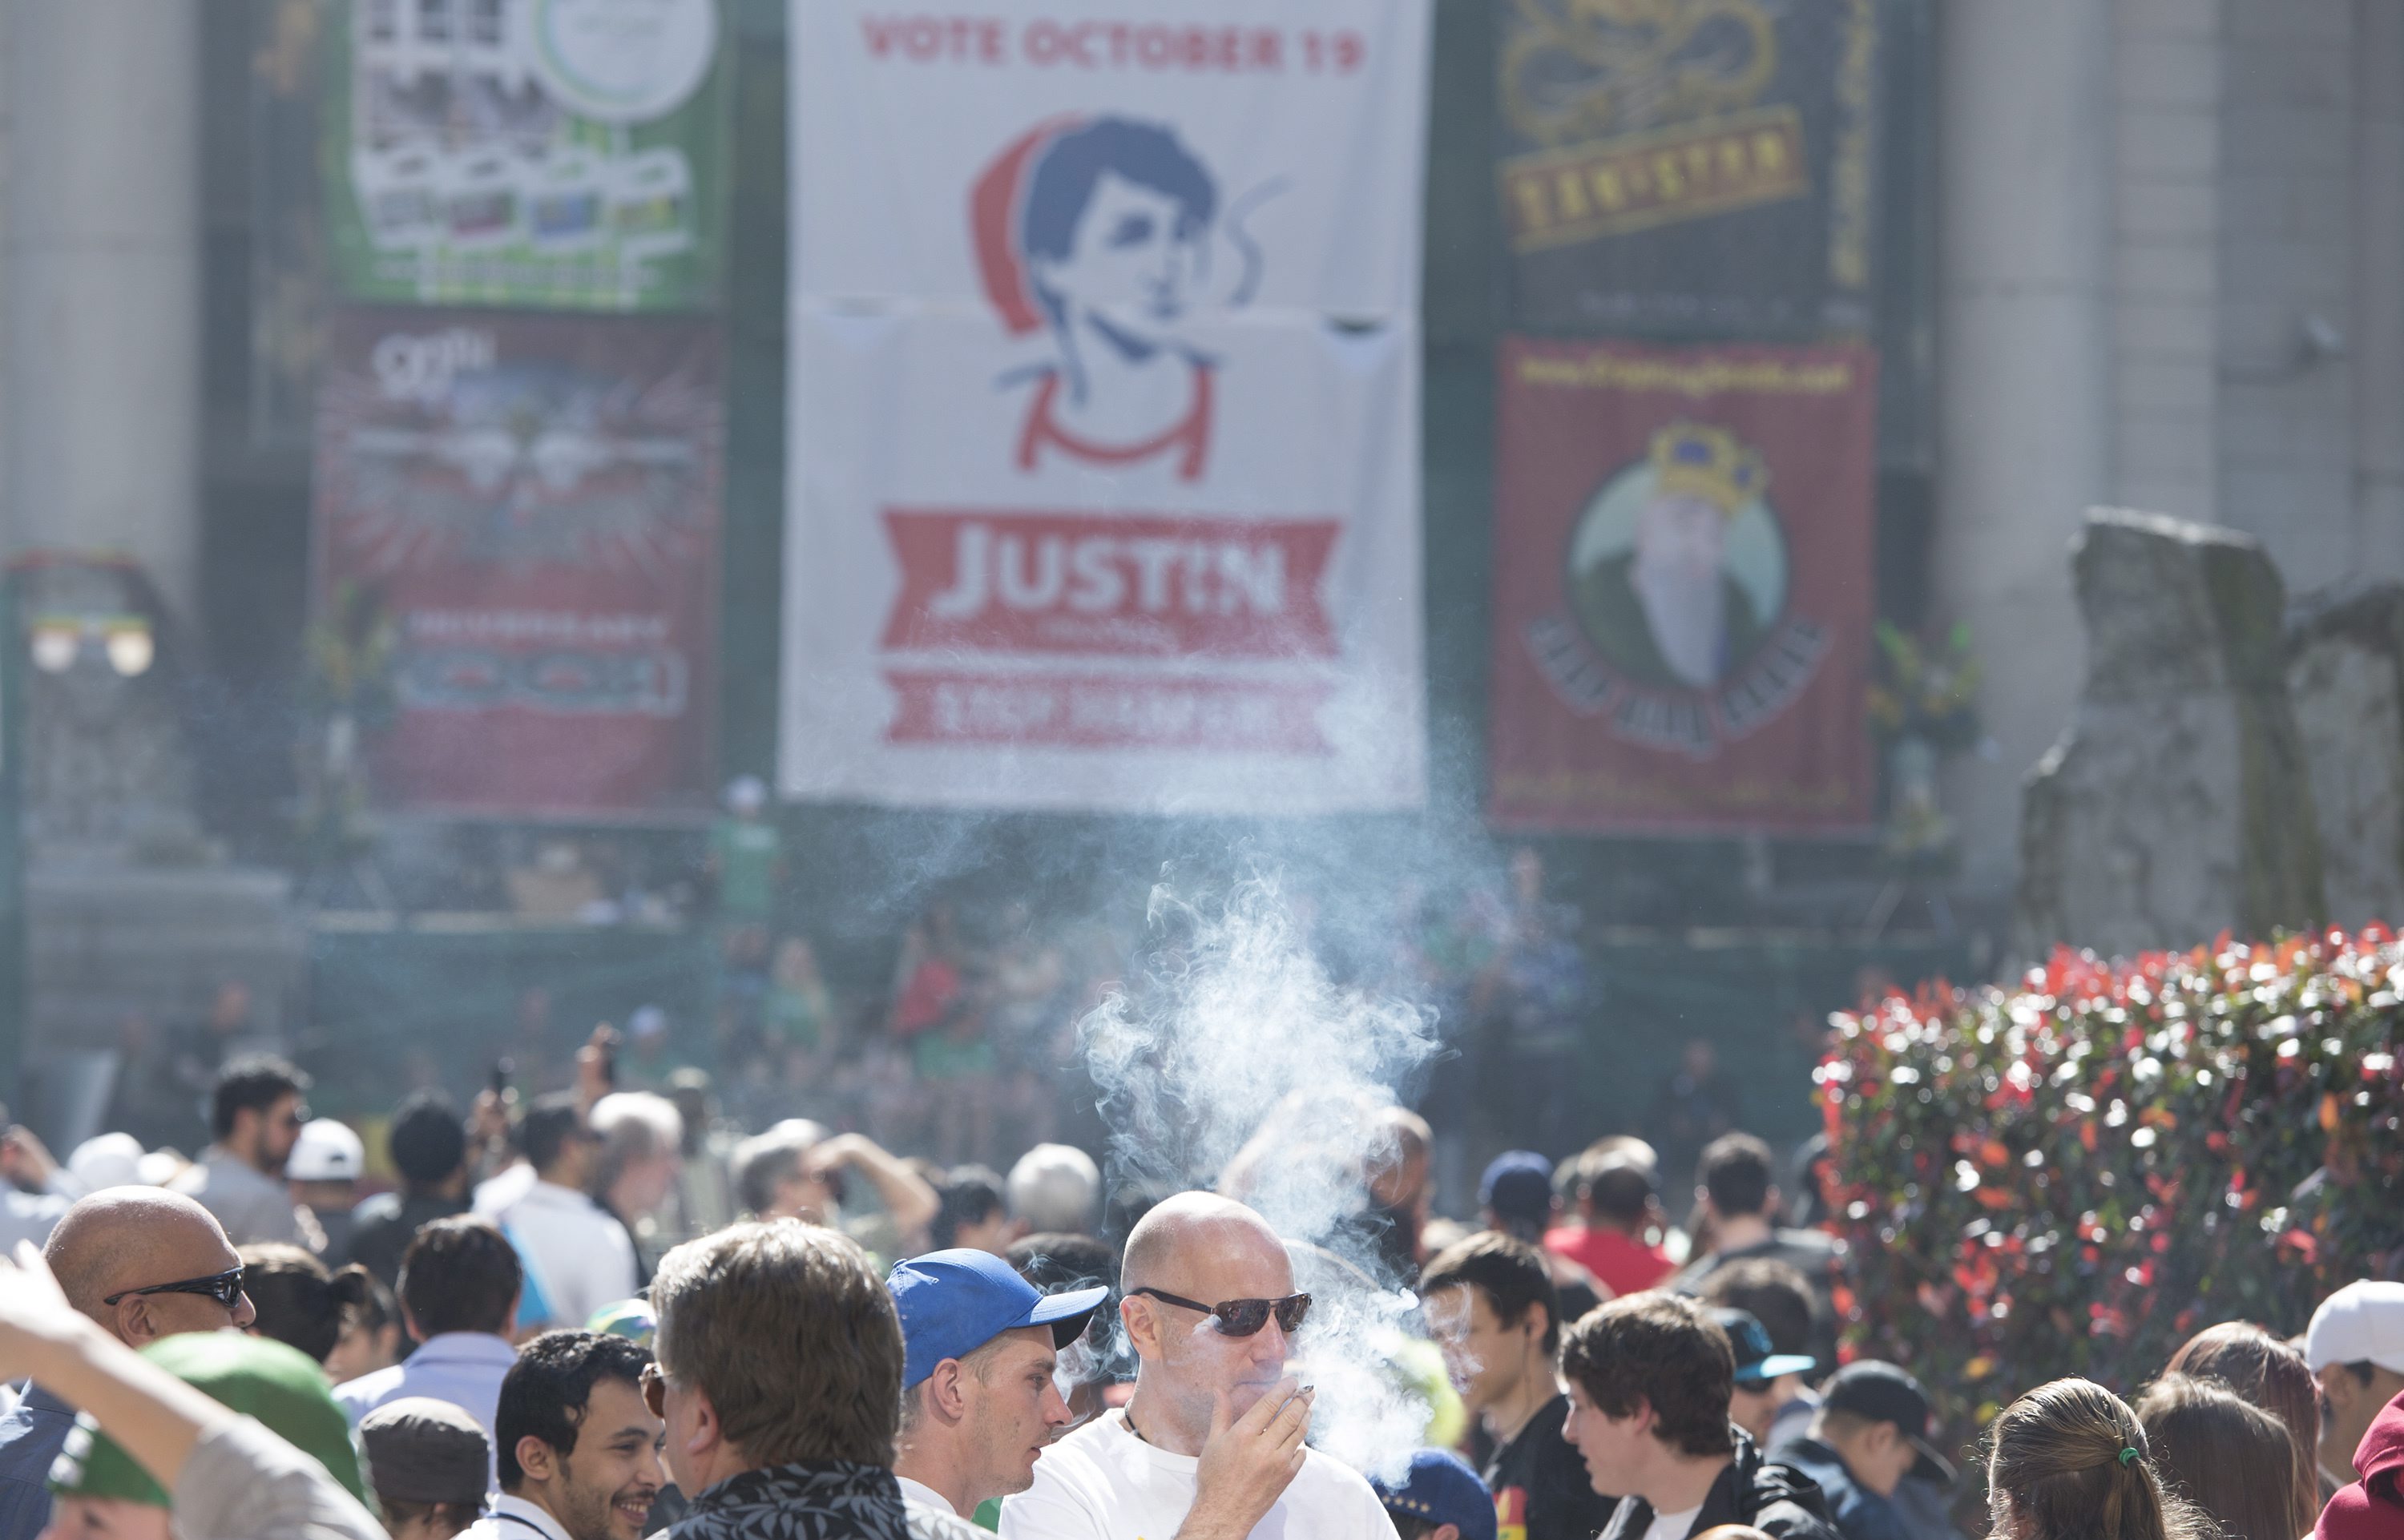 Thousands attend a 4-20 event in downtown Vancouver, B.C., on April 20, 2015 (Jonathan Hayward—AP)